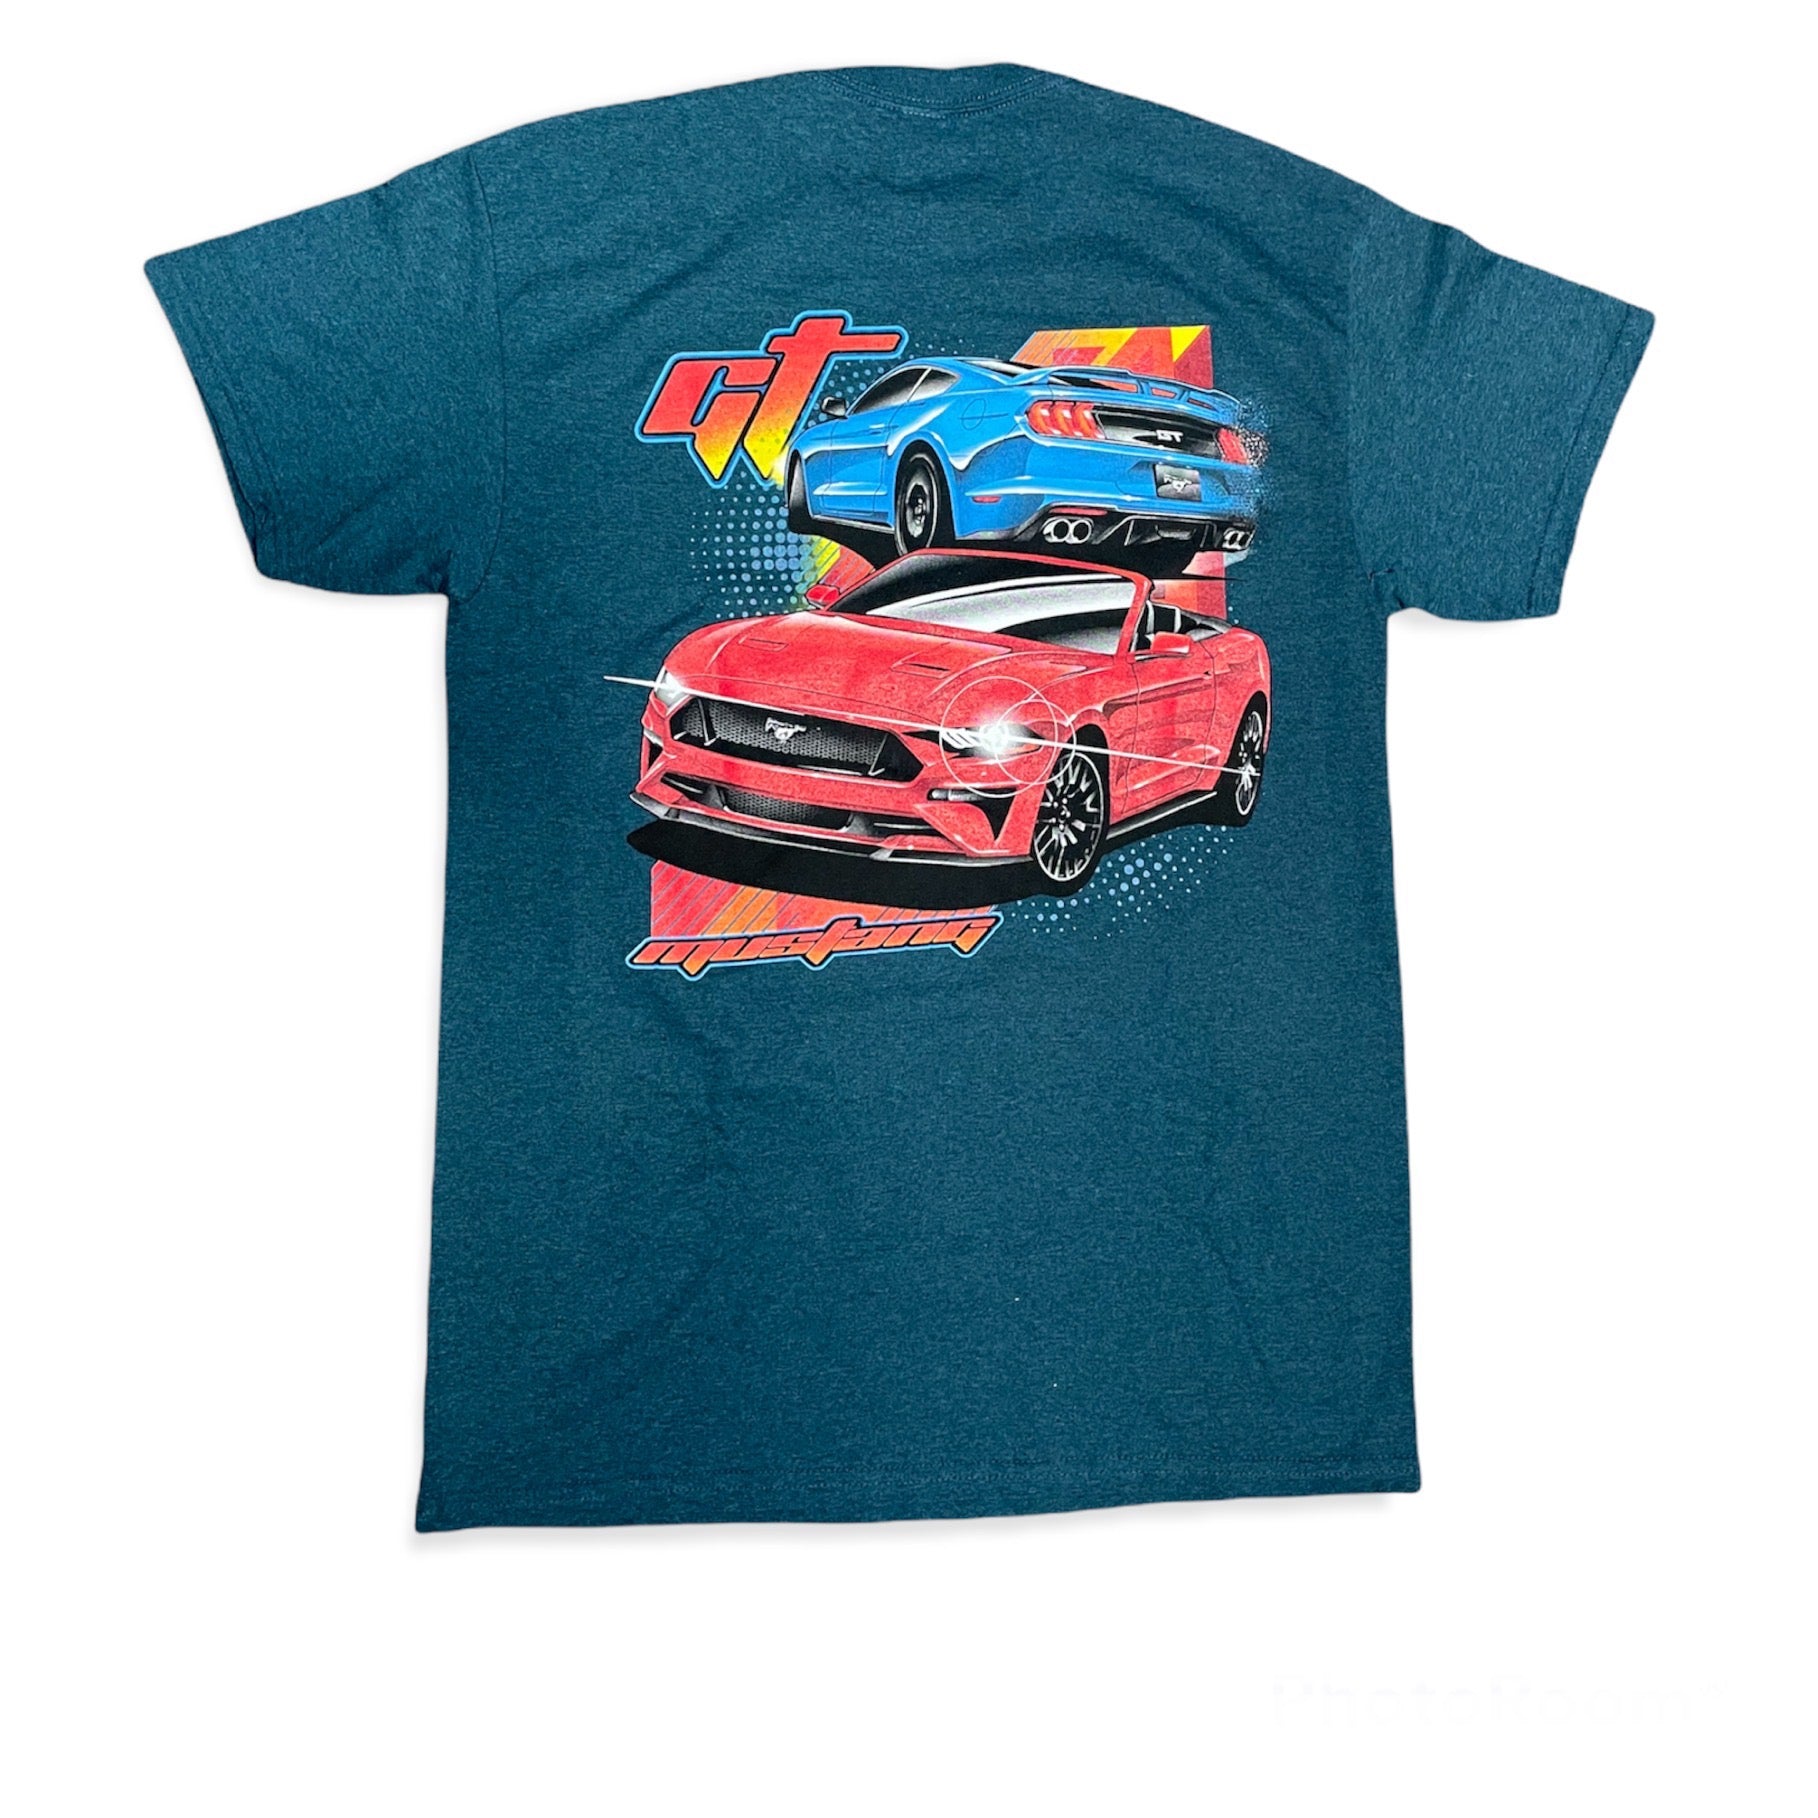 Ford Mustang Ford – Blue Petrol uscar-world T-Shirt GT Mustang